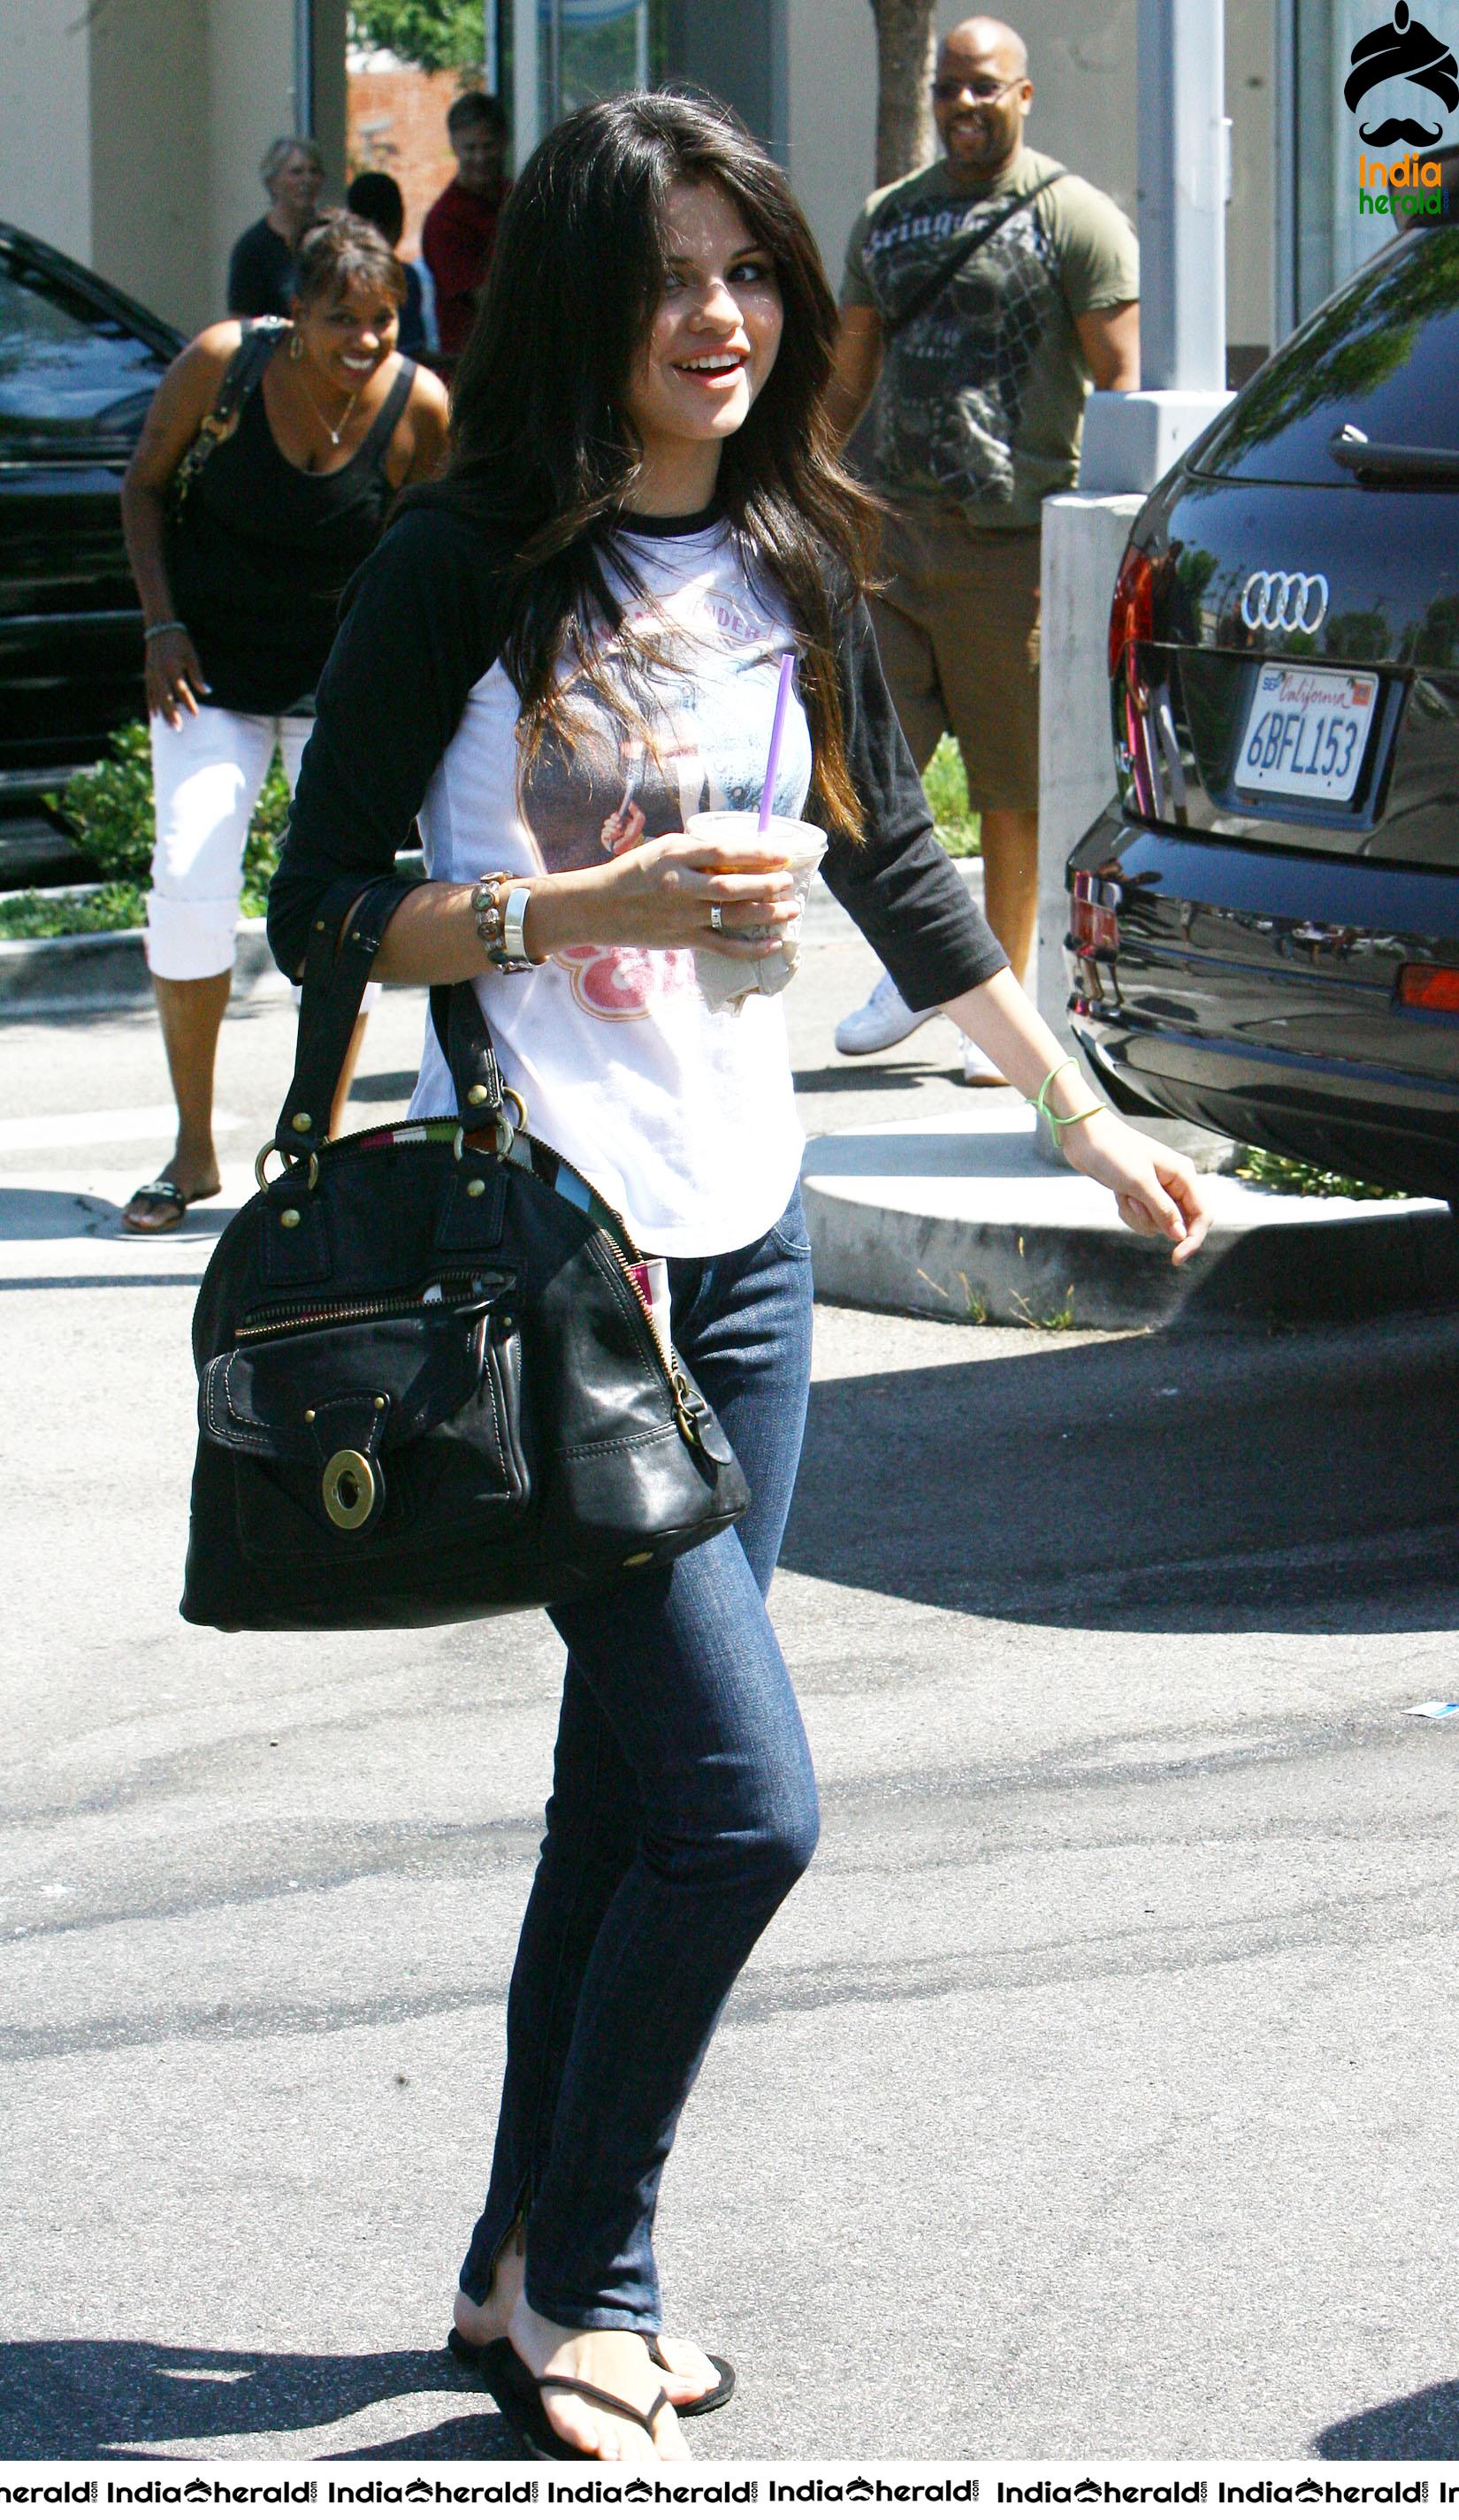 Selena Gomez caught by Paparazzi as she is seen in Coffee Bean shop at Toluca Lake